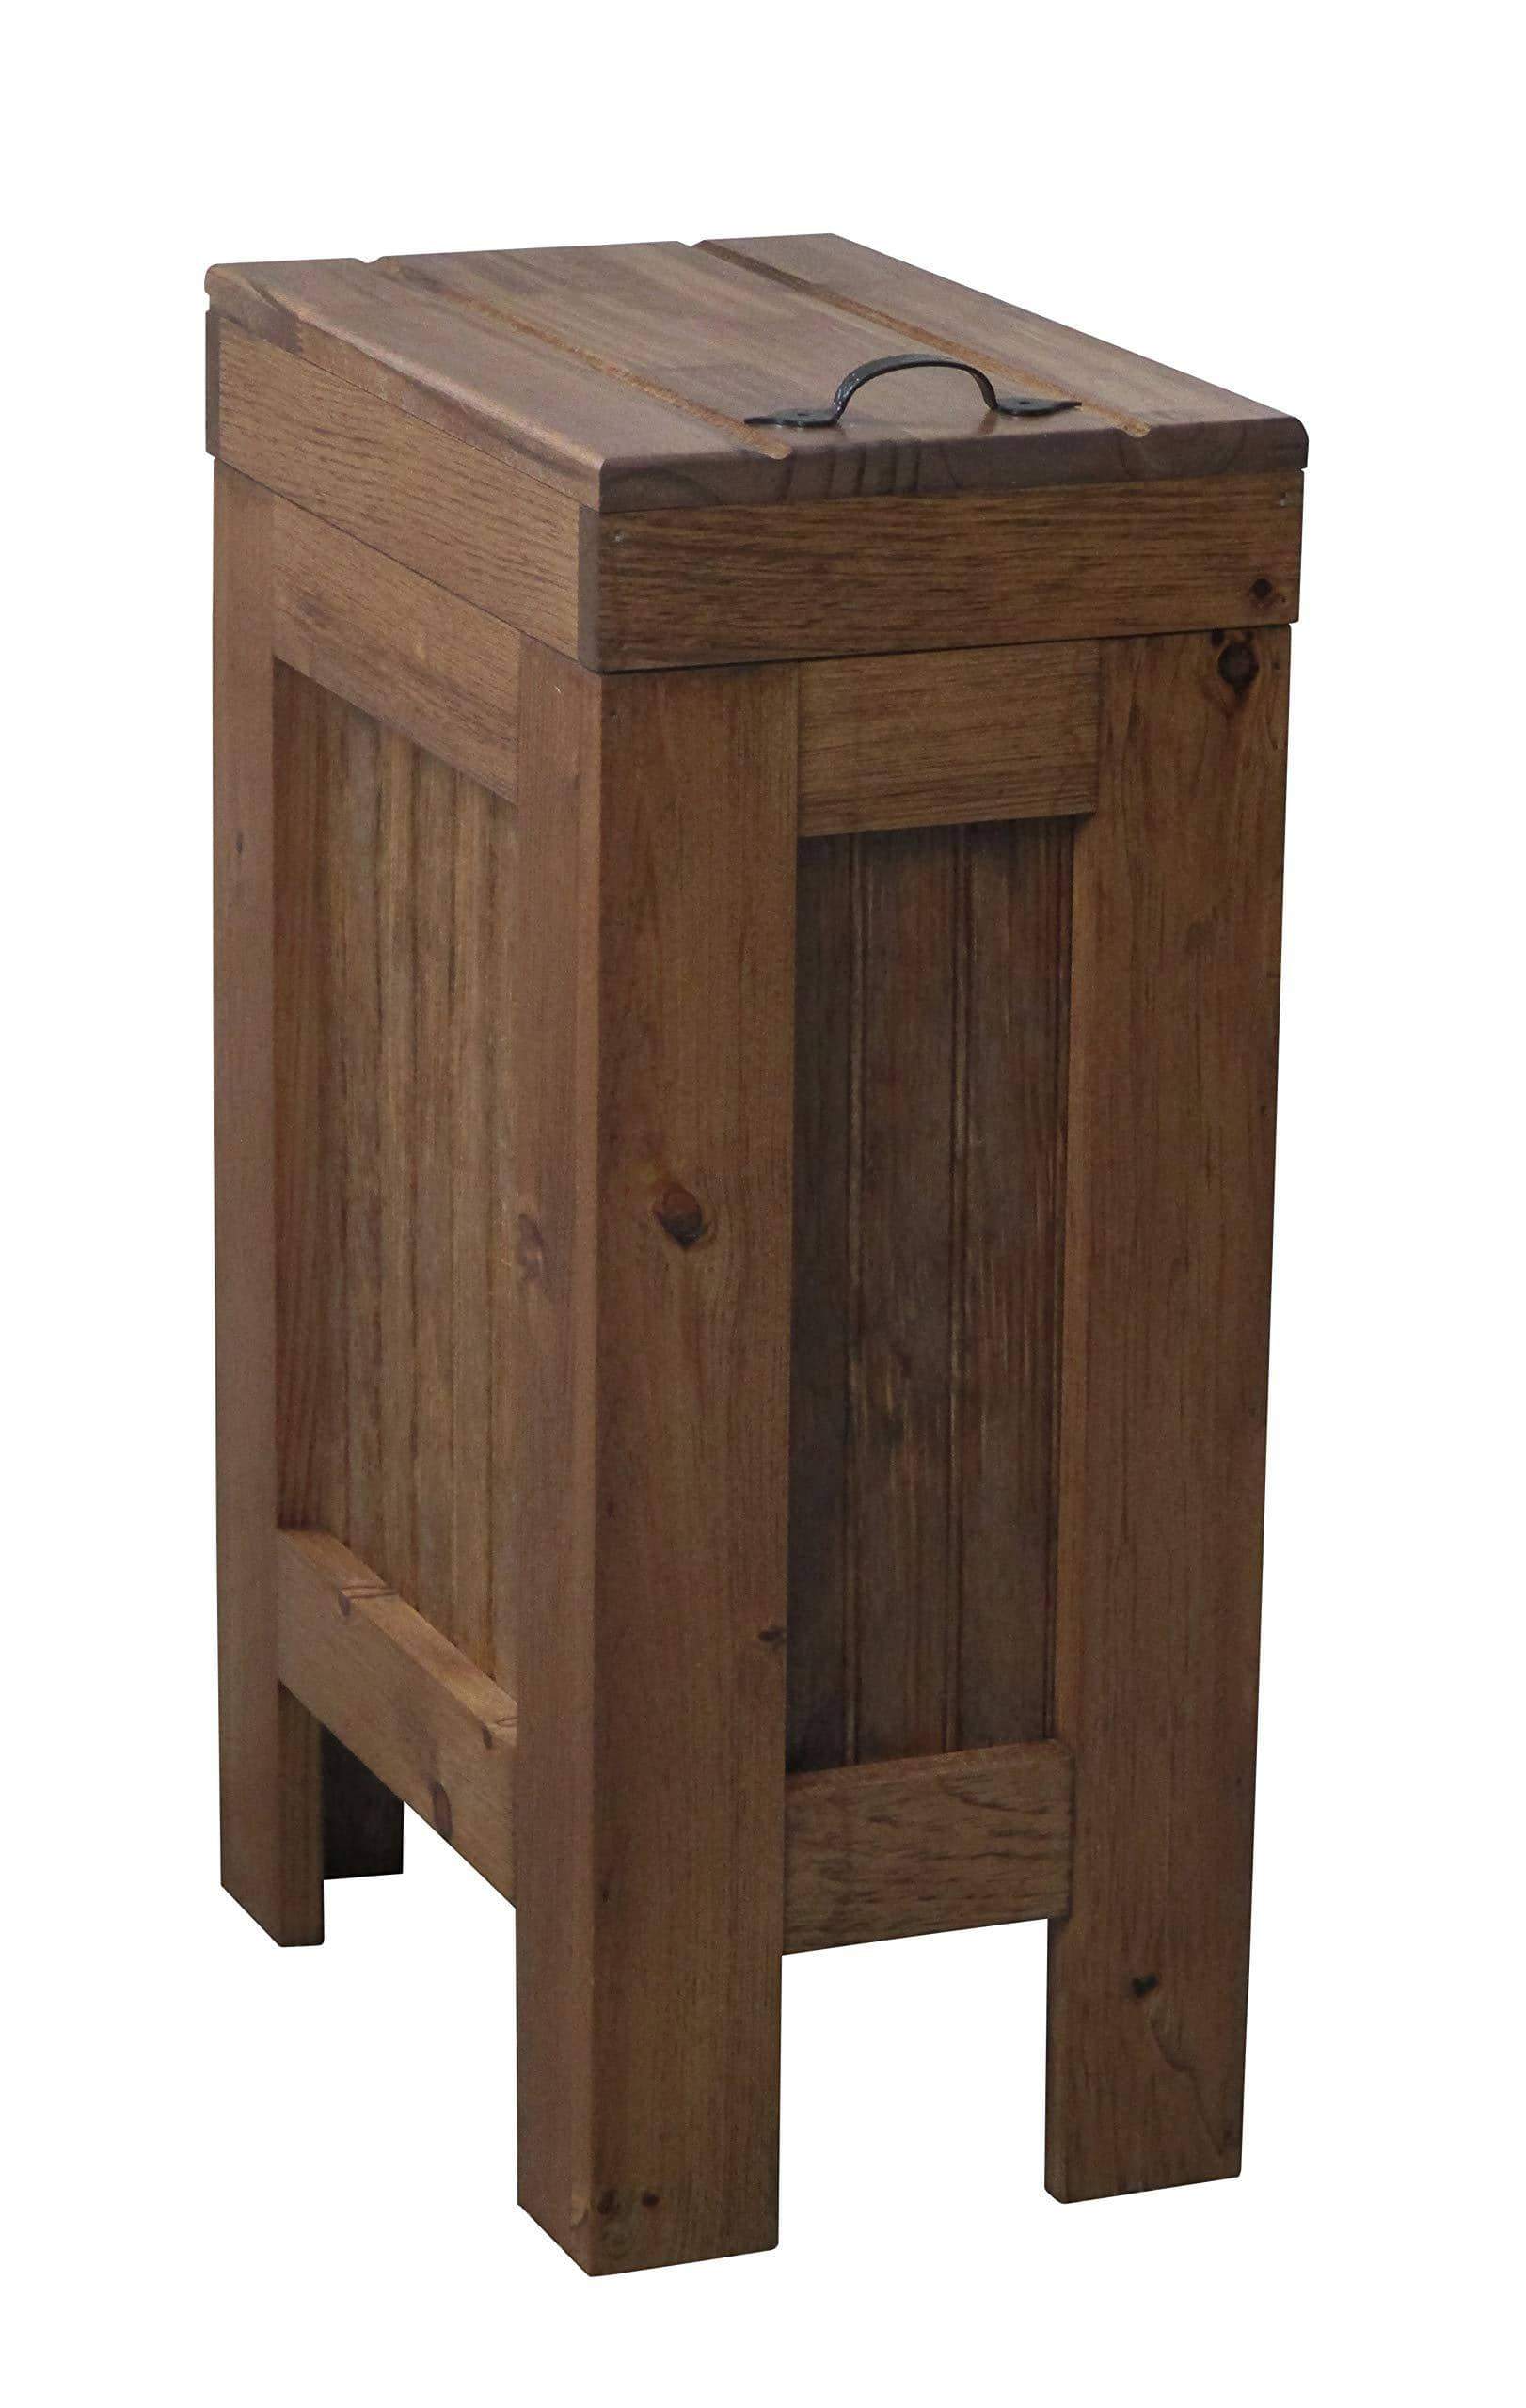 Exclusive wood wooden trash bin kitchen garbage can 13 gallon recycle bin dog food storage early american stain rustic pine metal handle handmade in usa by buffalowoodshop